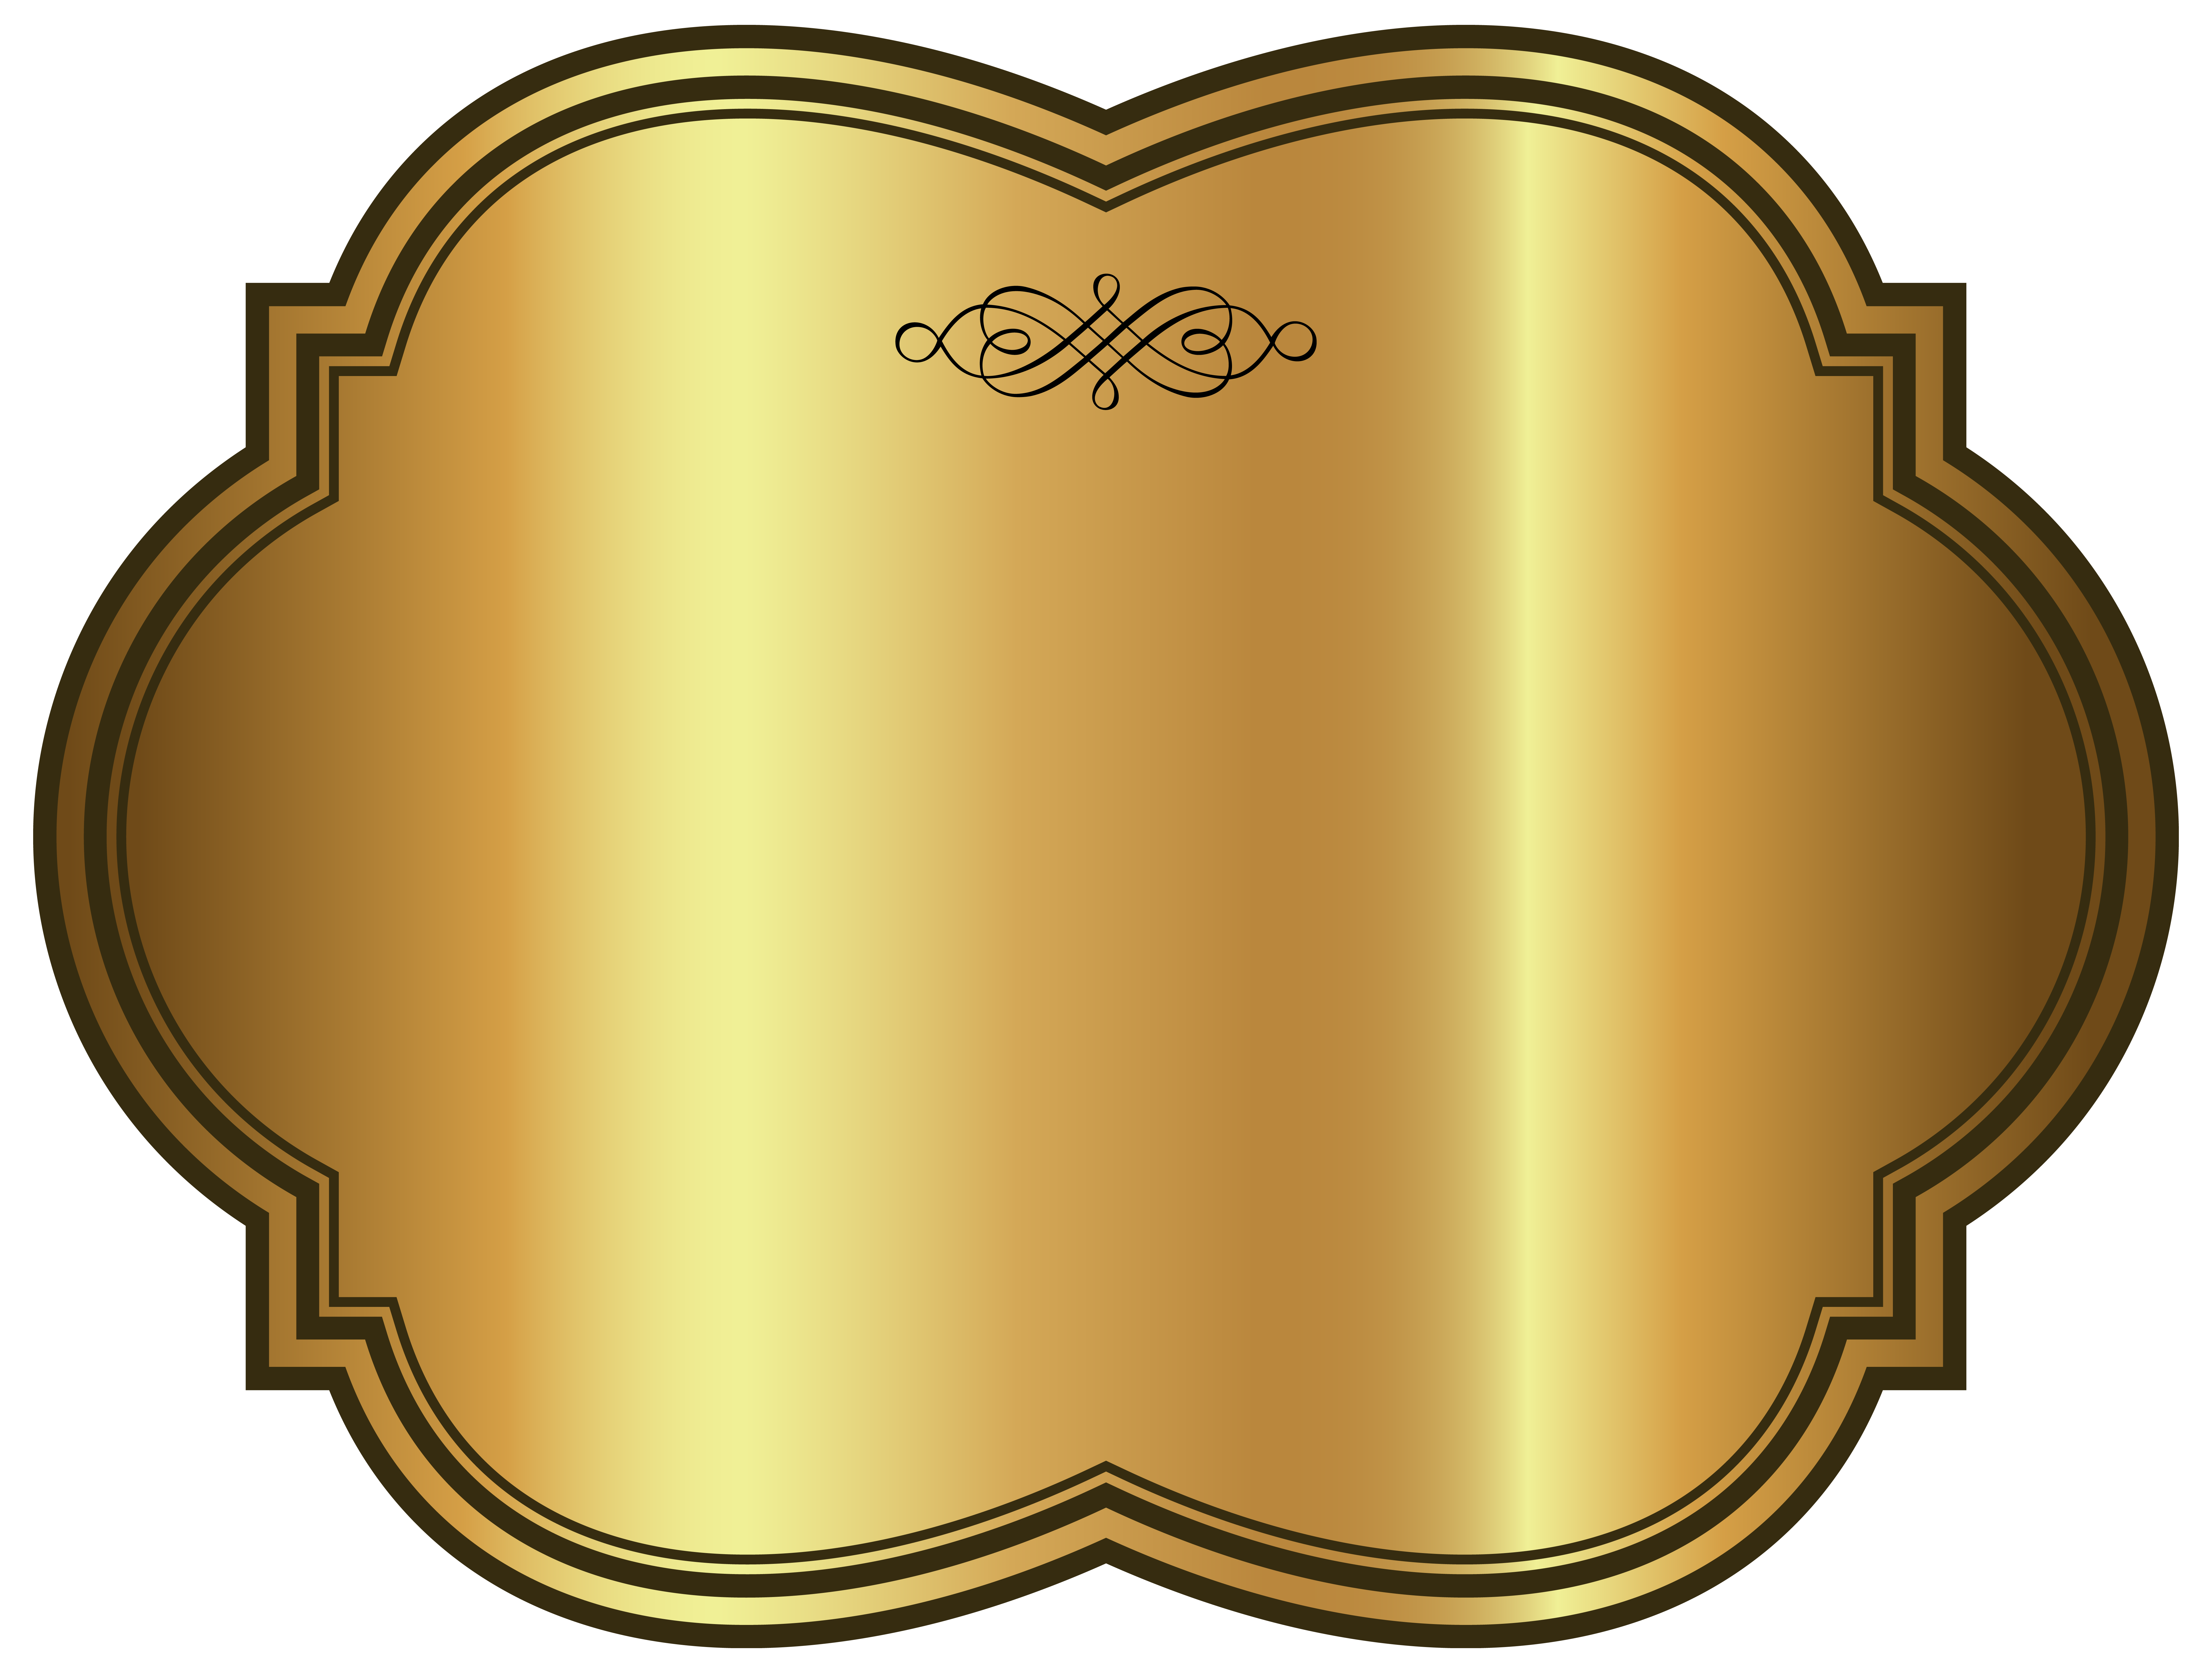 New Top Rated Golden Label, Illustration Royalty Free SVG